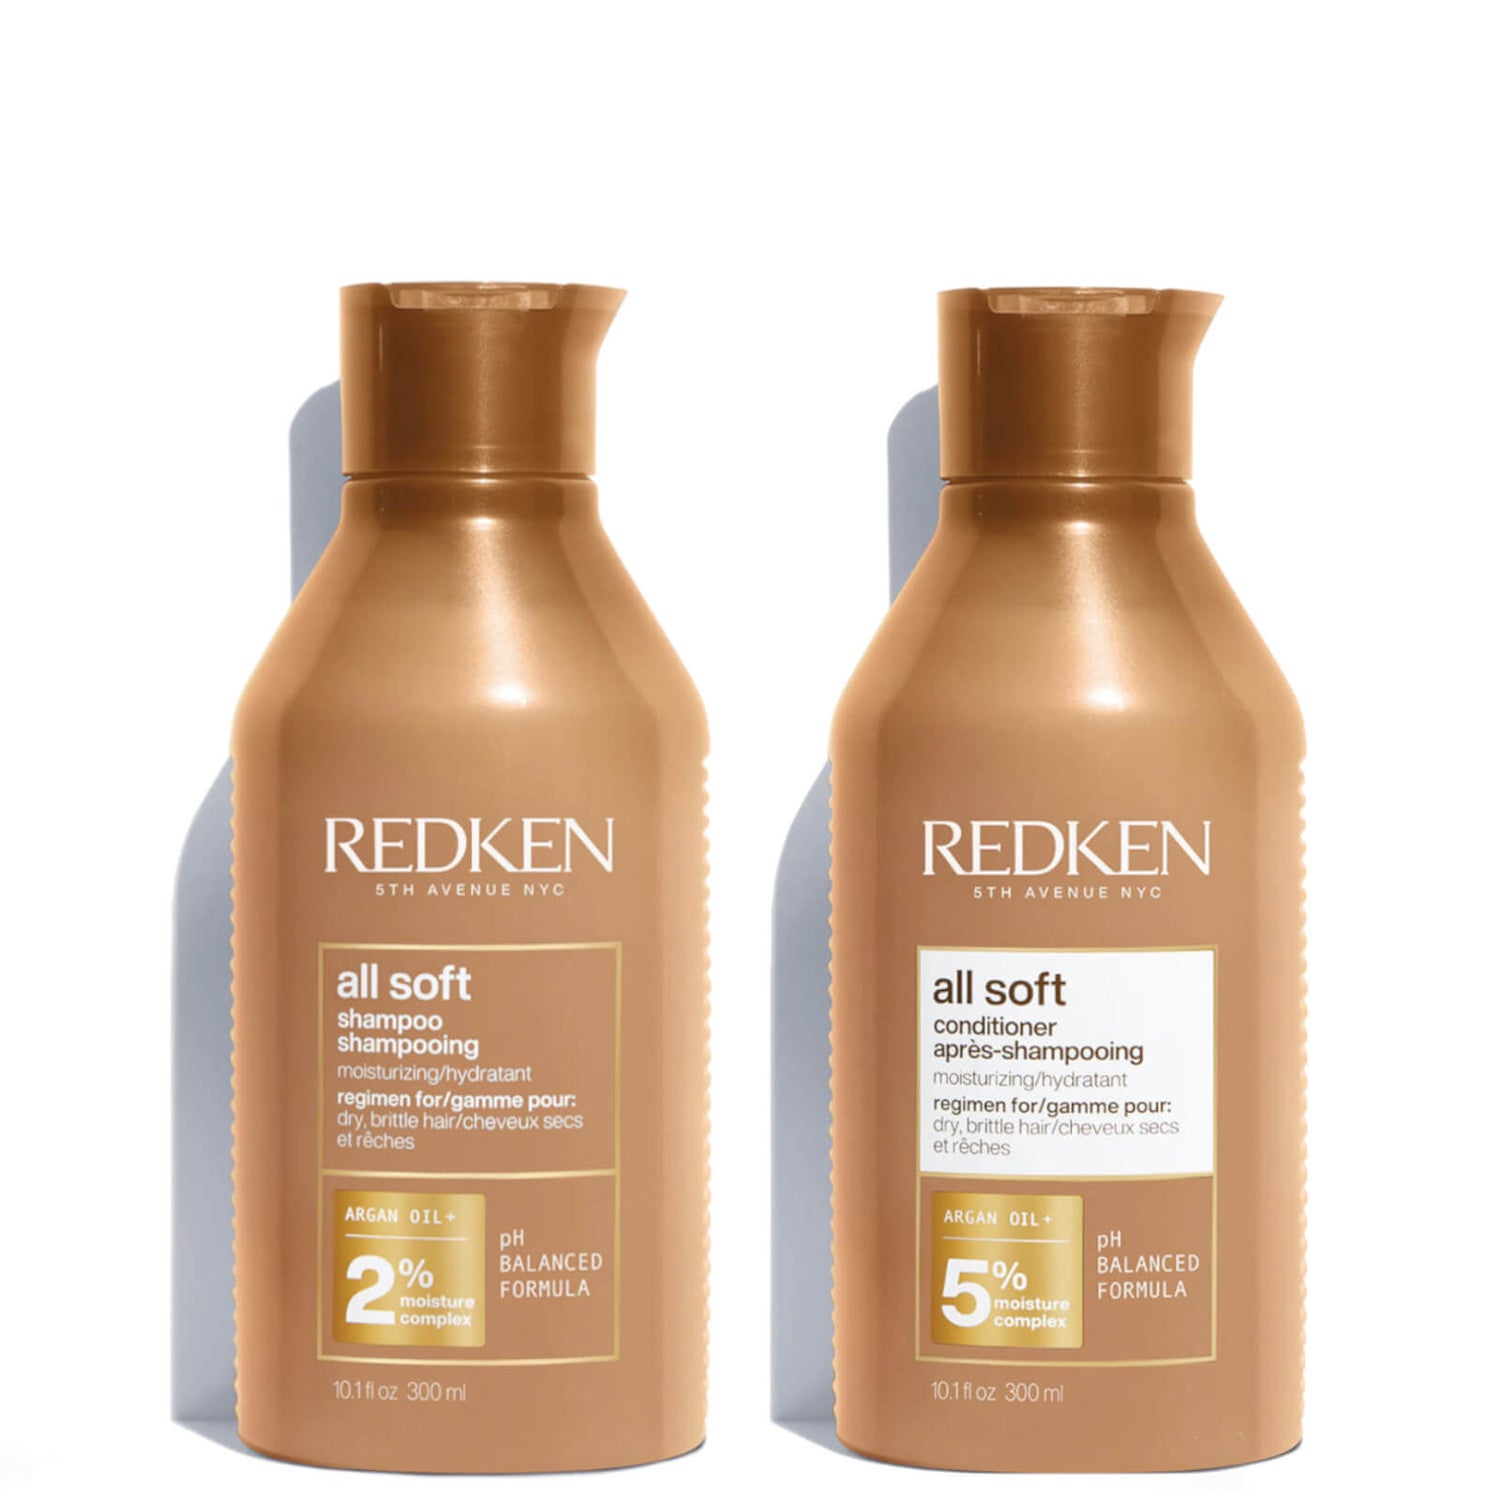 Redken All Soft Shampoo And Conditioner Duo (Worth $86.00)